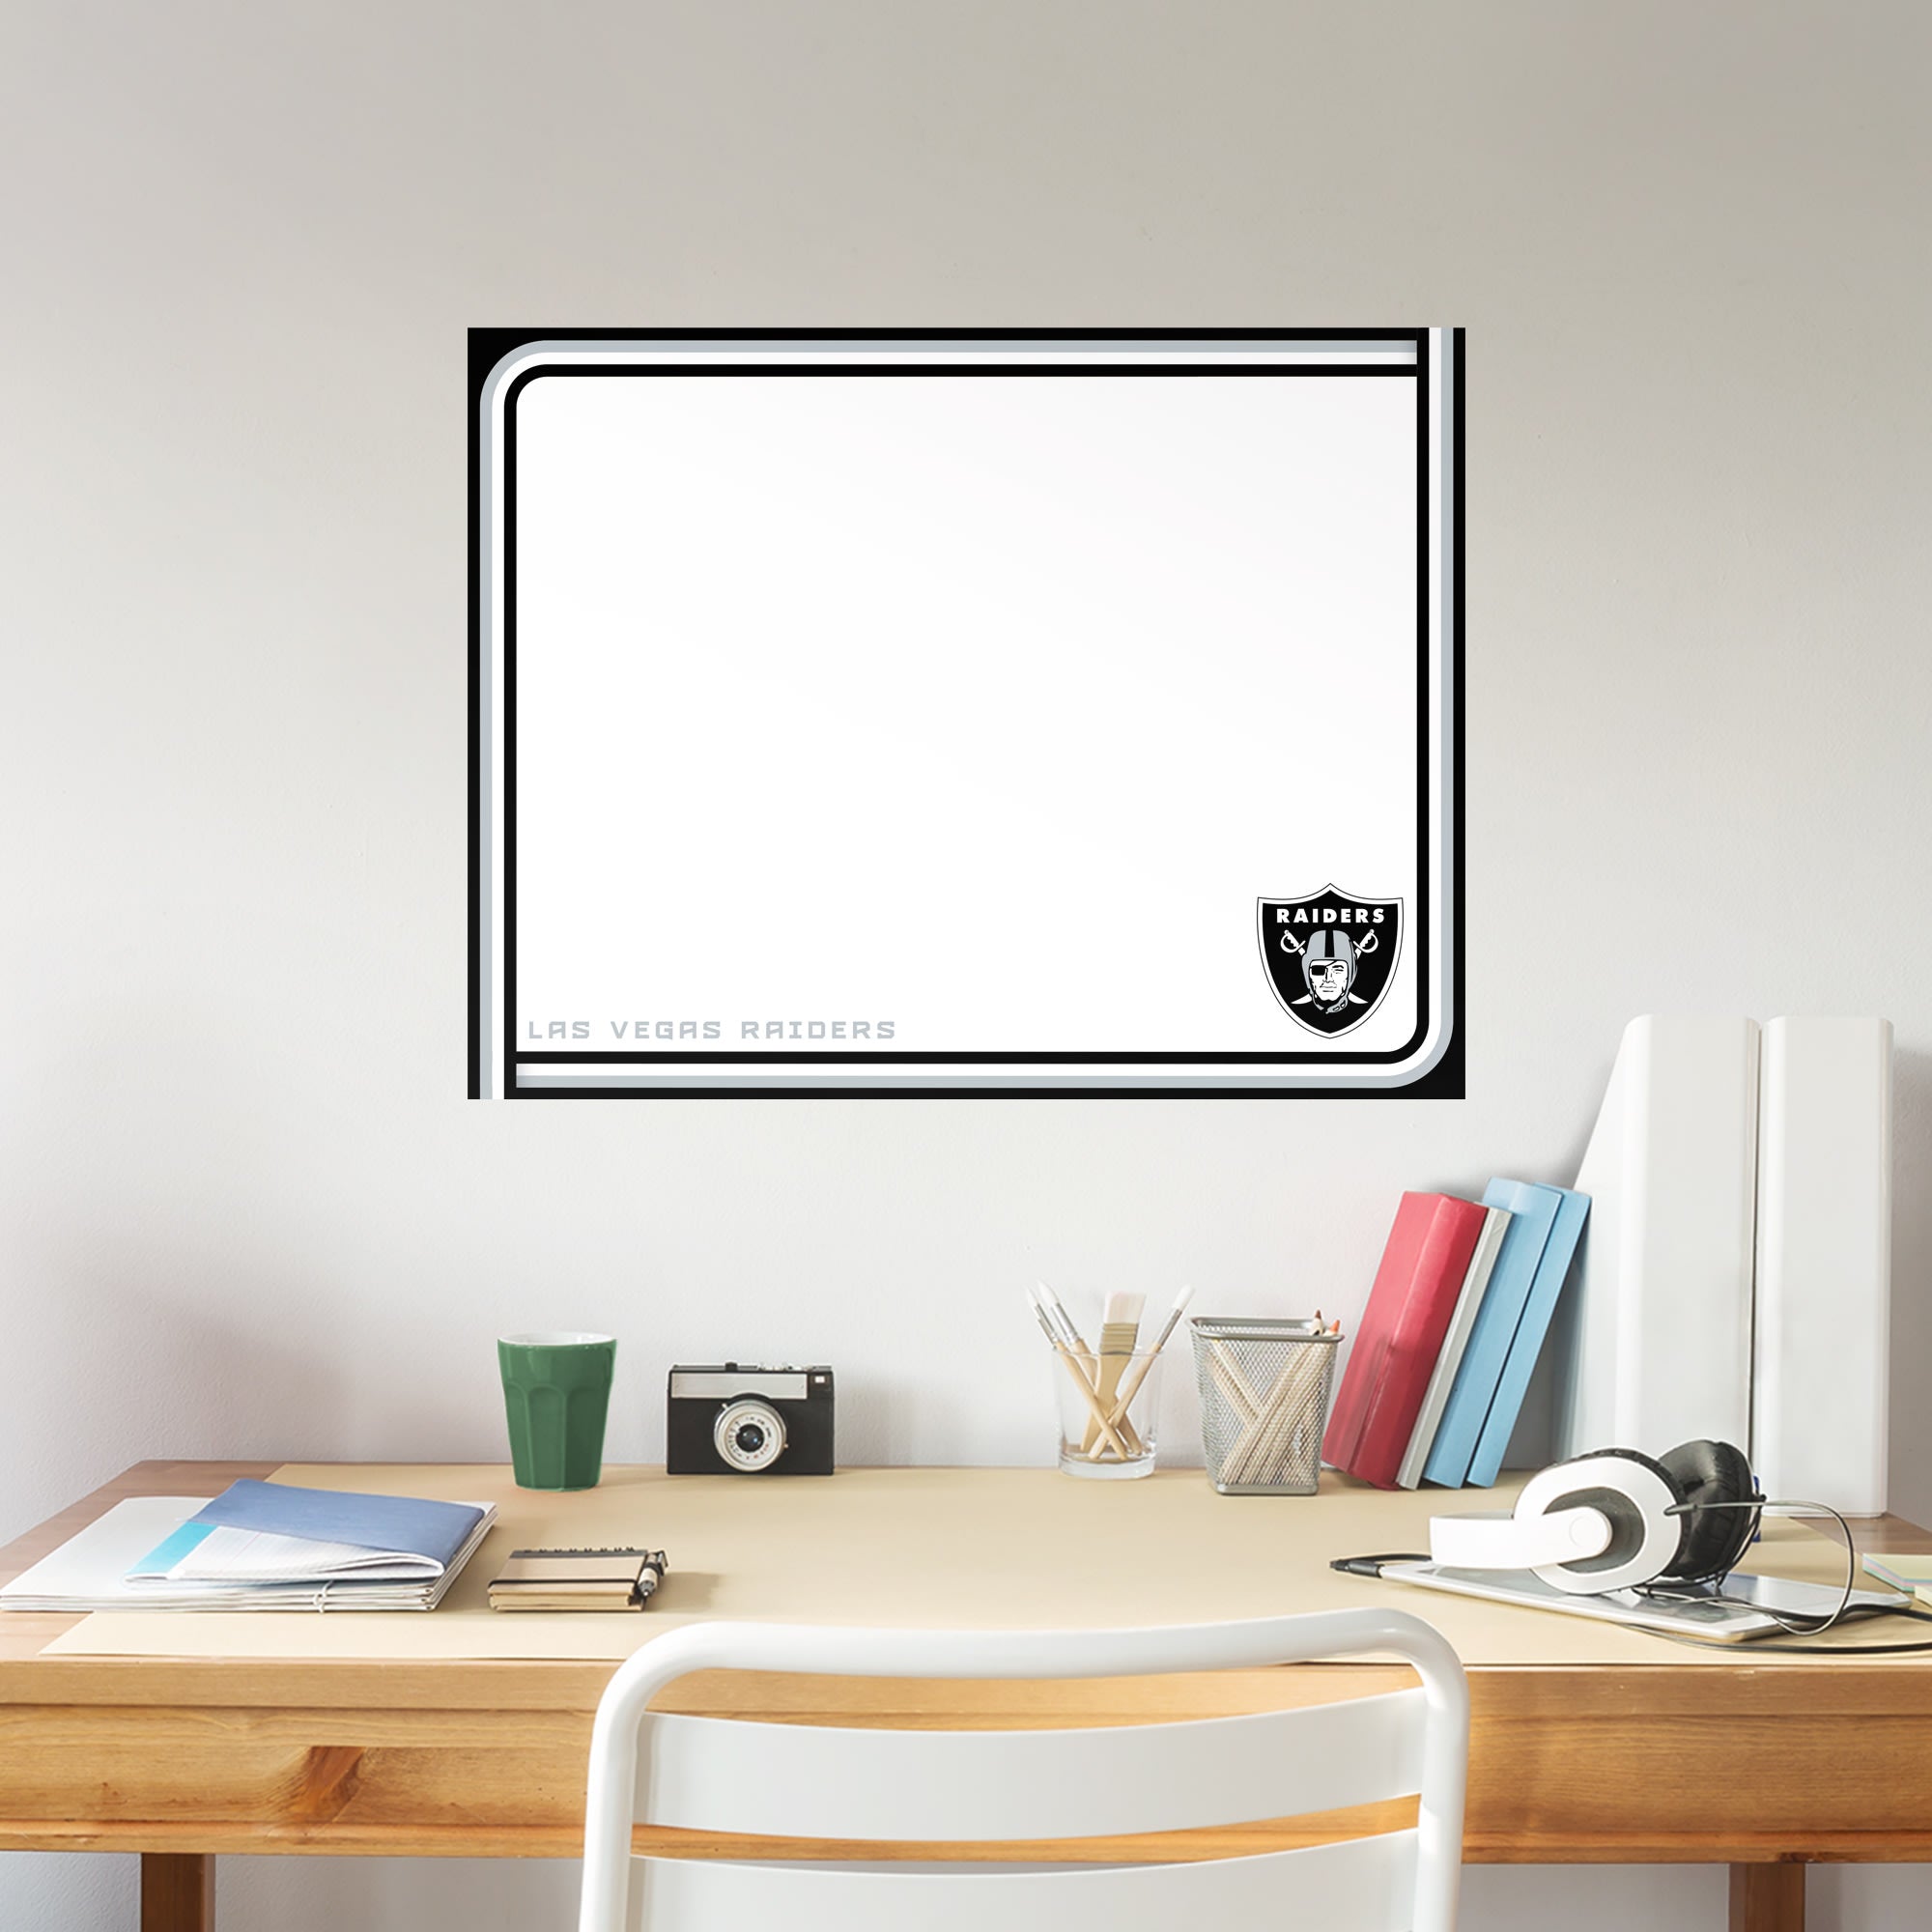 Las Vegas Raiders: Dry Erase Whiteboard - Officially Licensed NFL Removable Wall Decal XL by Fathead | Vinyl